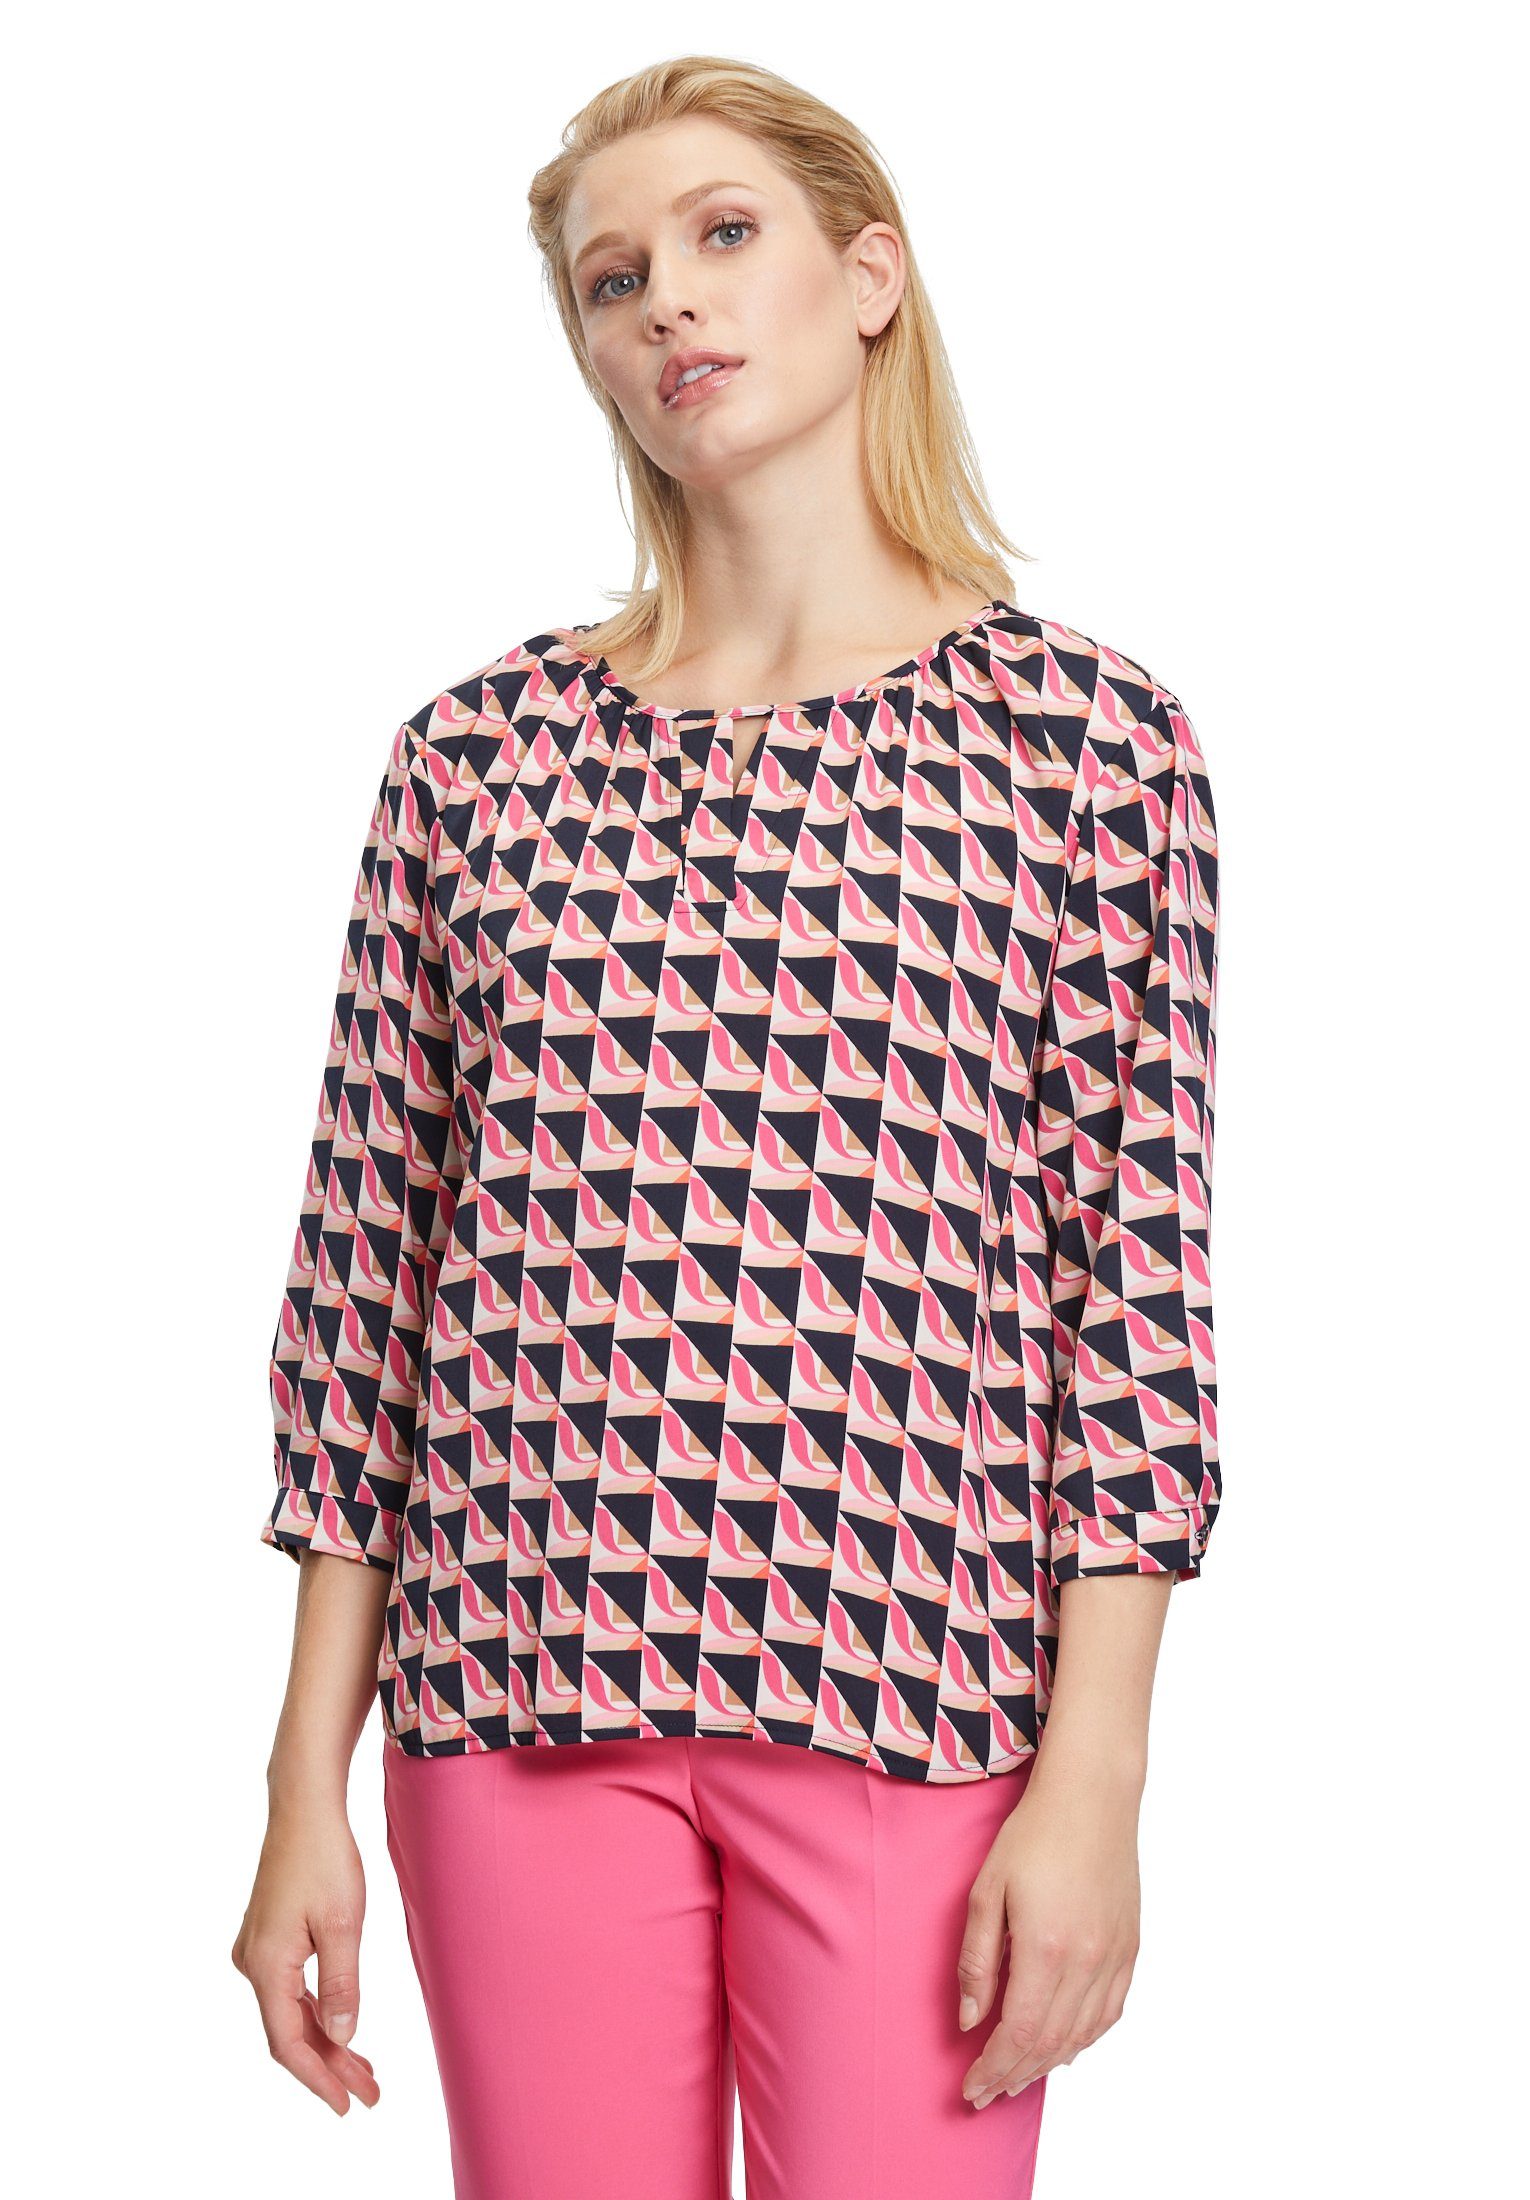 Betty Barclay Klassische Bluse Muster Rosa mit Muster